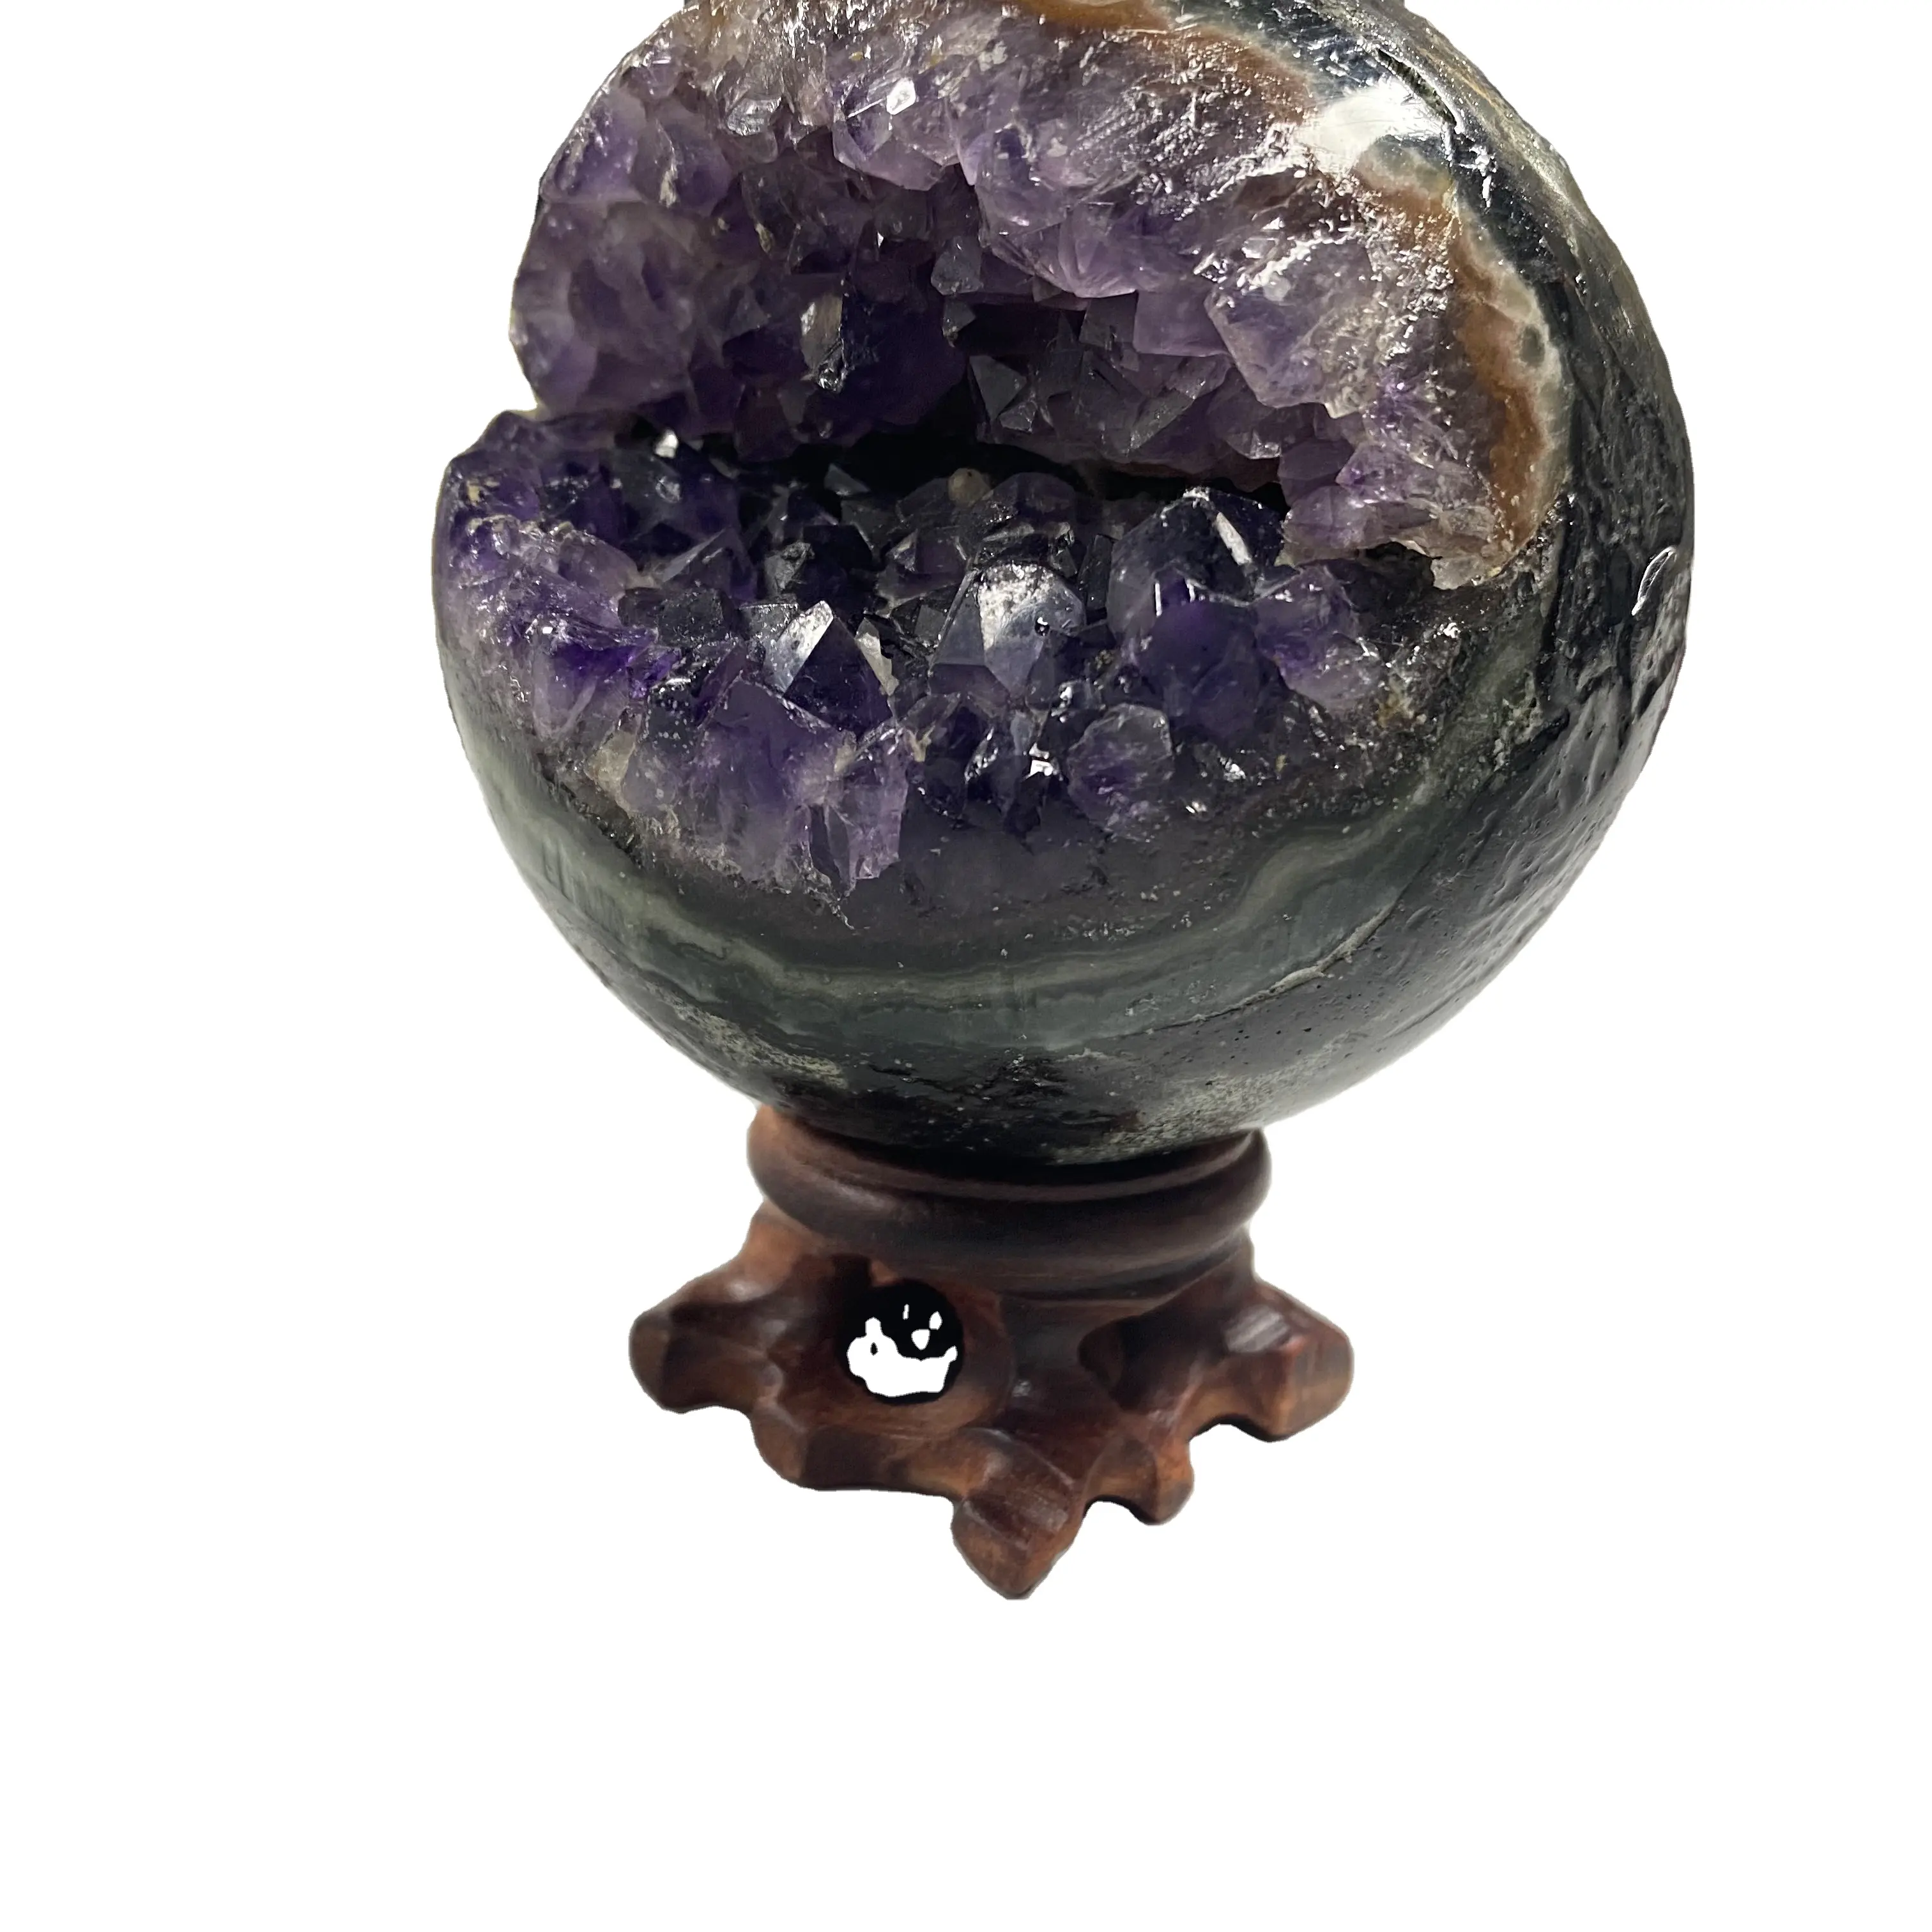 Wholesale High Quality Natural Amethyst Smiley Cluster Crystal Geode Amethyst Sphere Geode With Mix Size For Home Decor